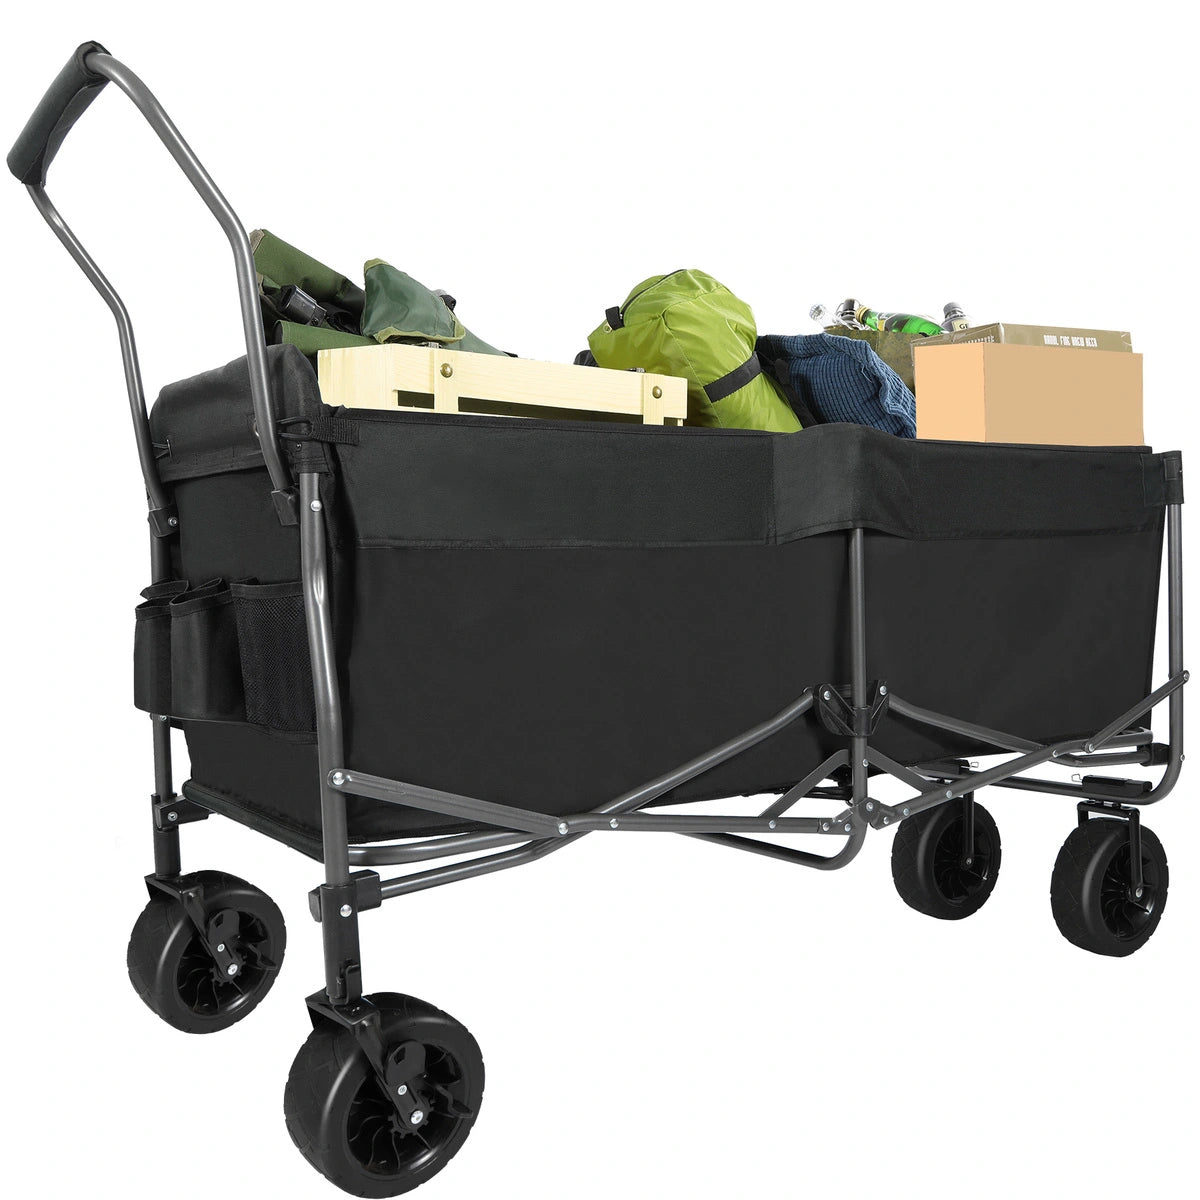 Extra Long Extended Folding Wagon with Side Pocket and Brakes